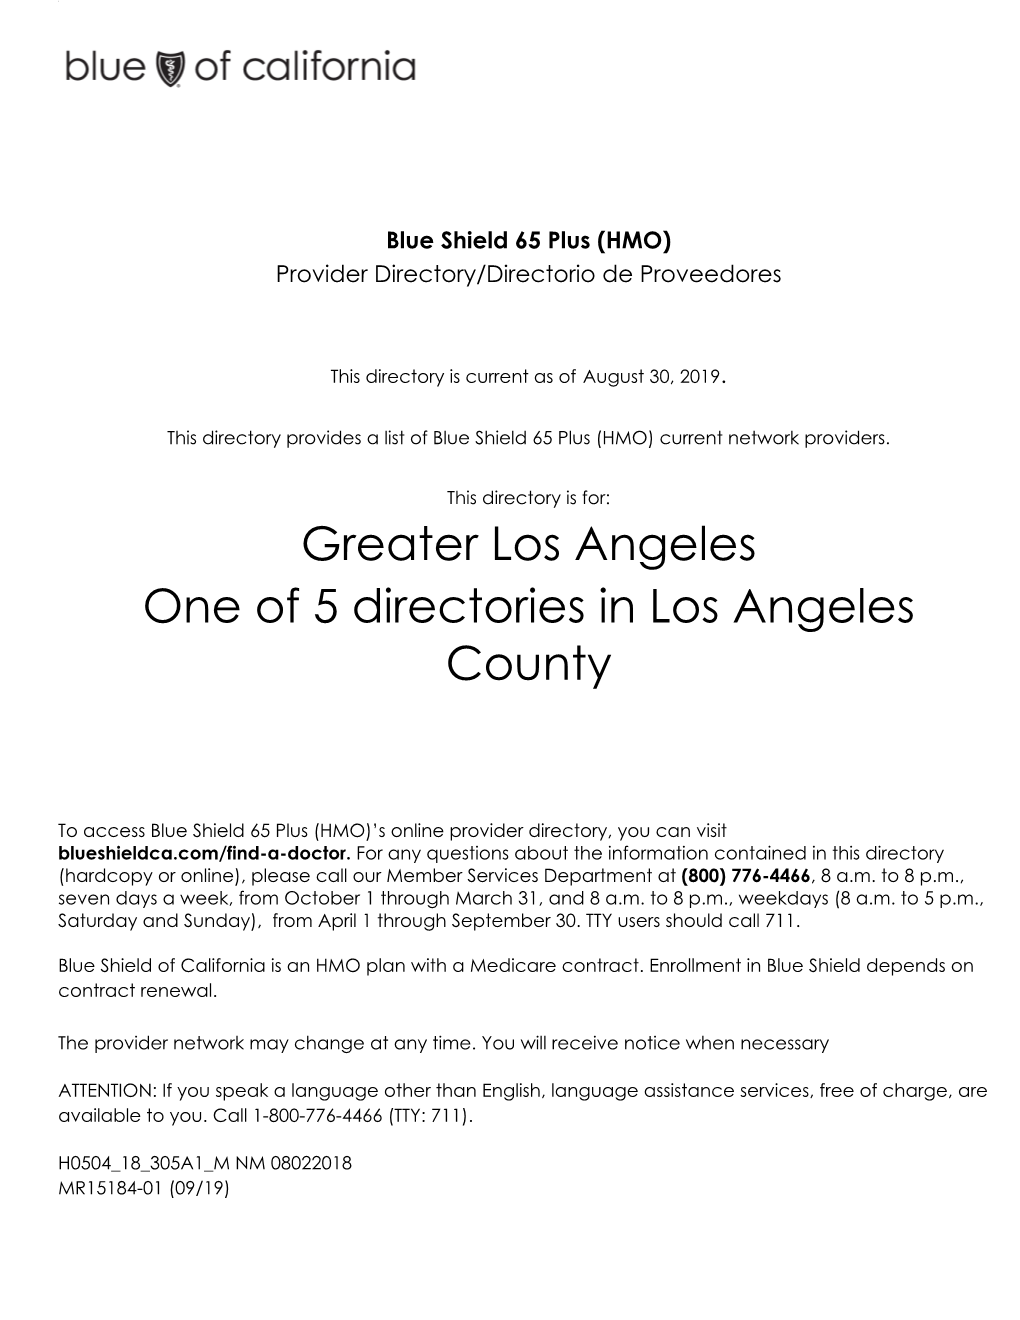 Greater Los Angeles One of 5 Directories in Los Angeles County